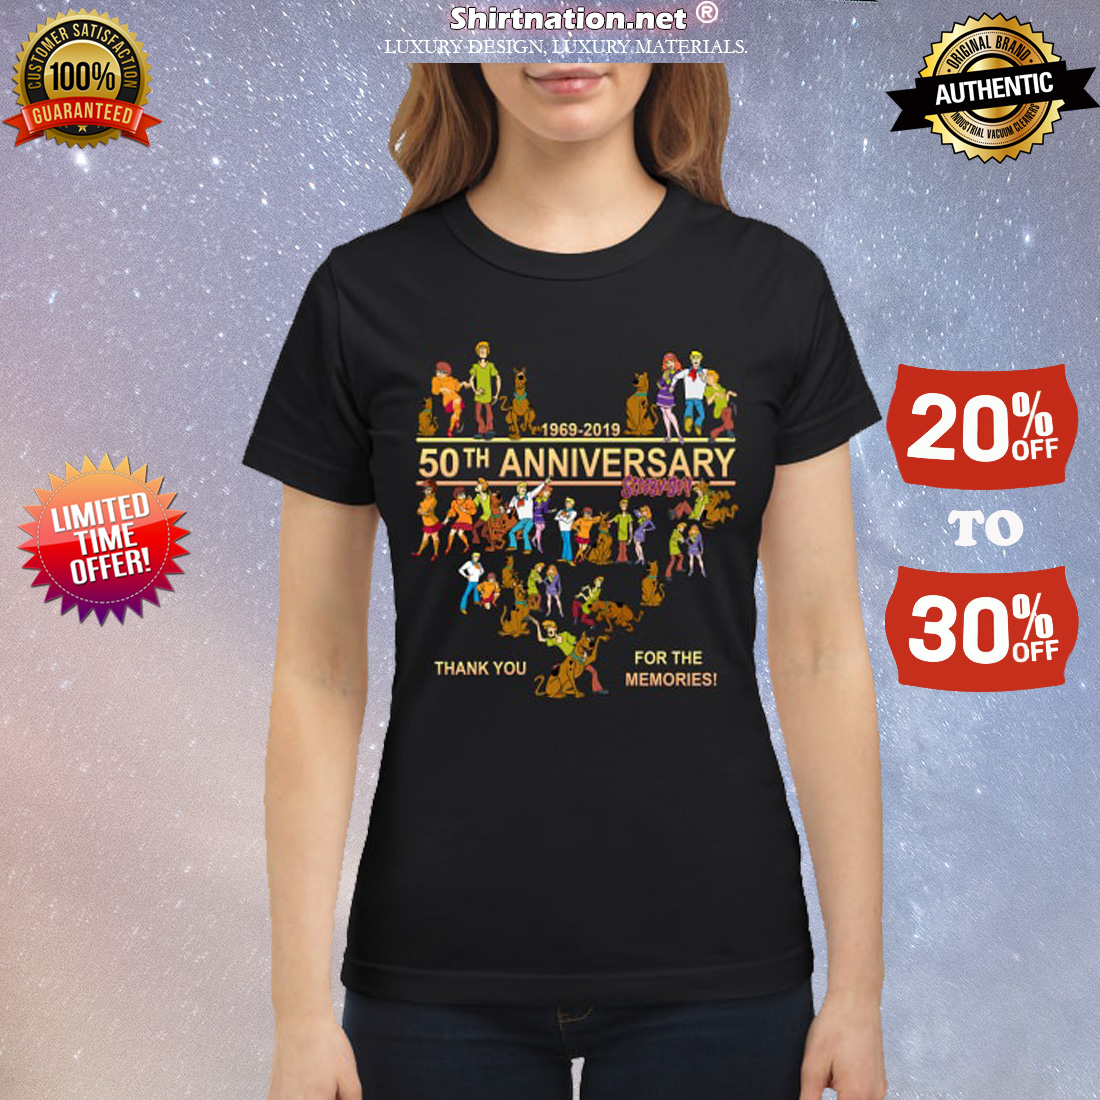 Scooby doo 1969 2019 anniversary thank you for the memories classic shirt